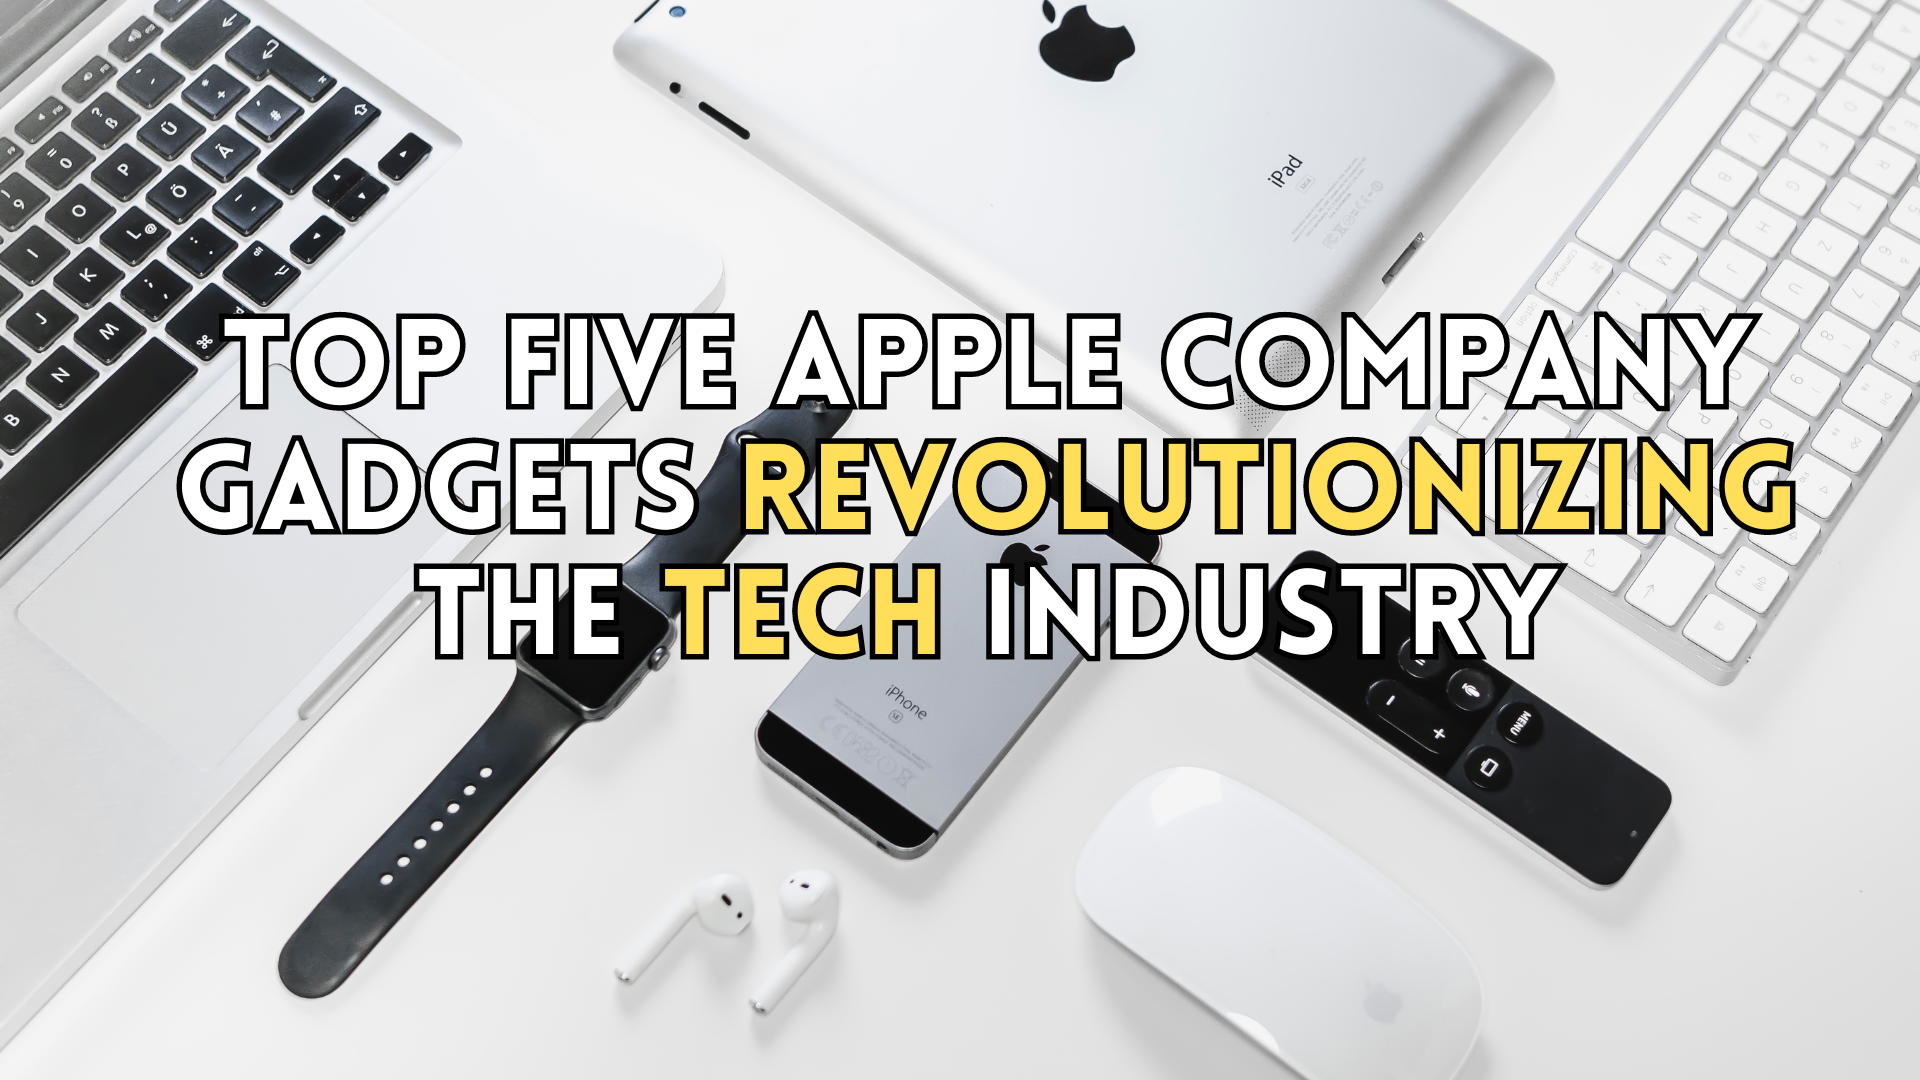 Top Five Apple Company Gadgets Revolutionizing the Tech Industry